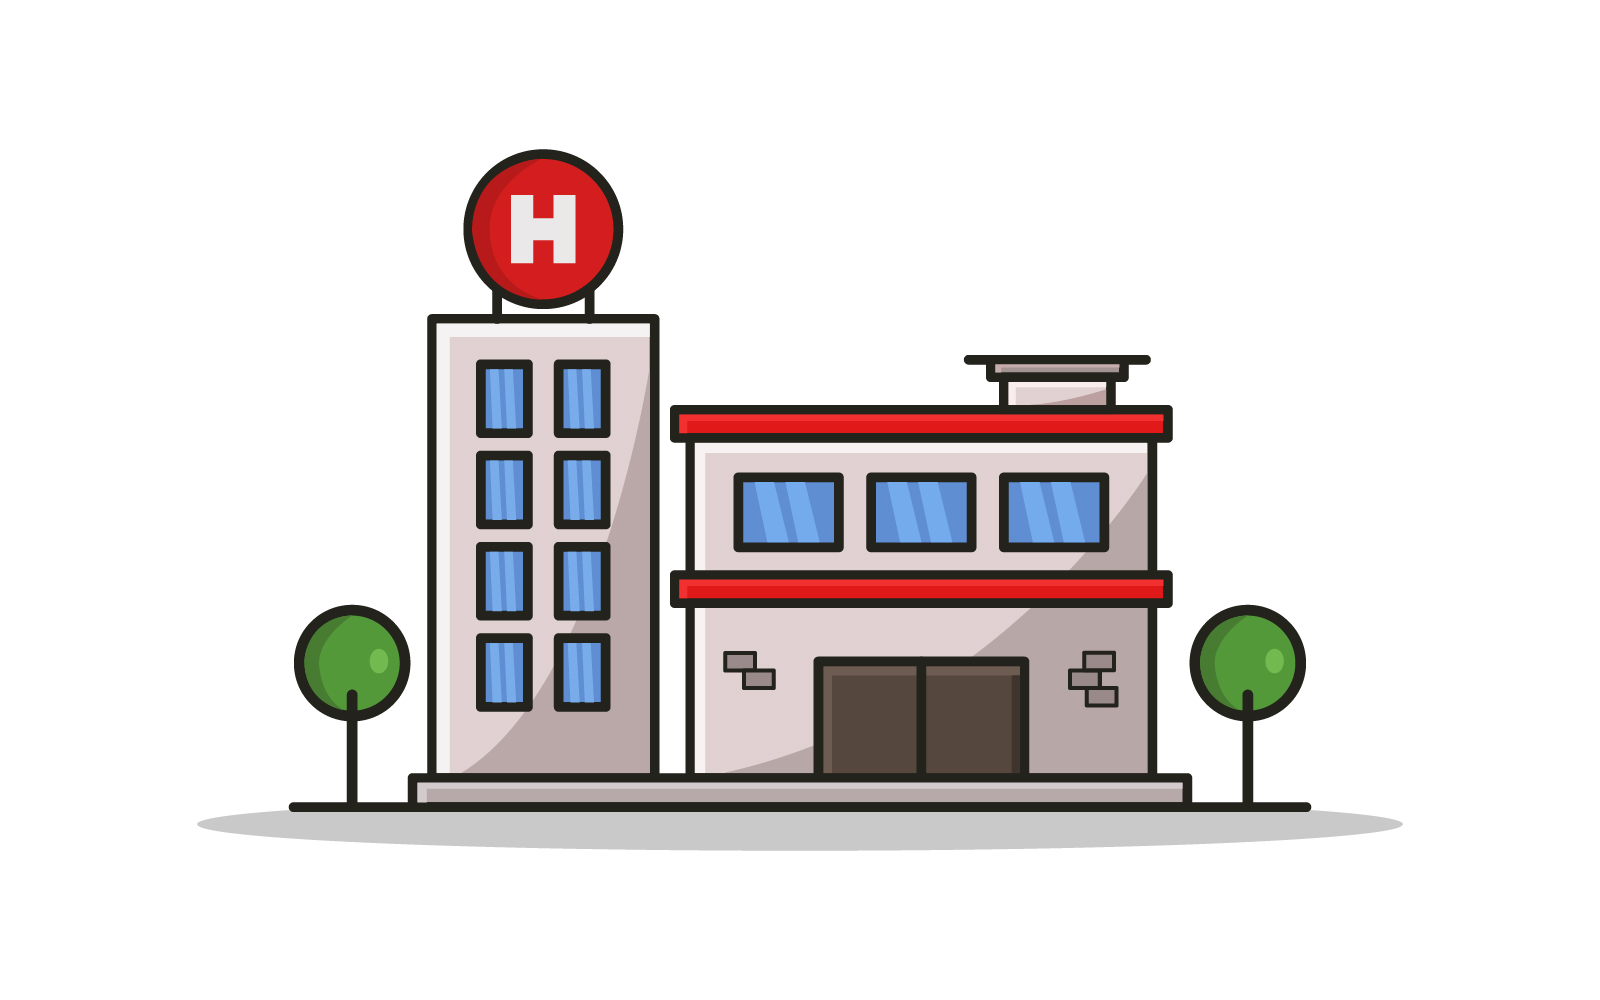 Hospital illustrated in vector on a white background